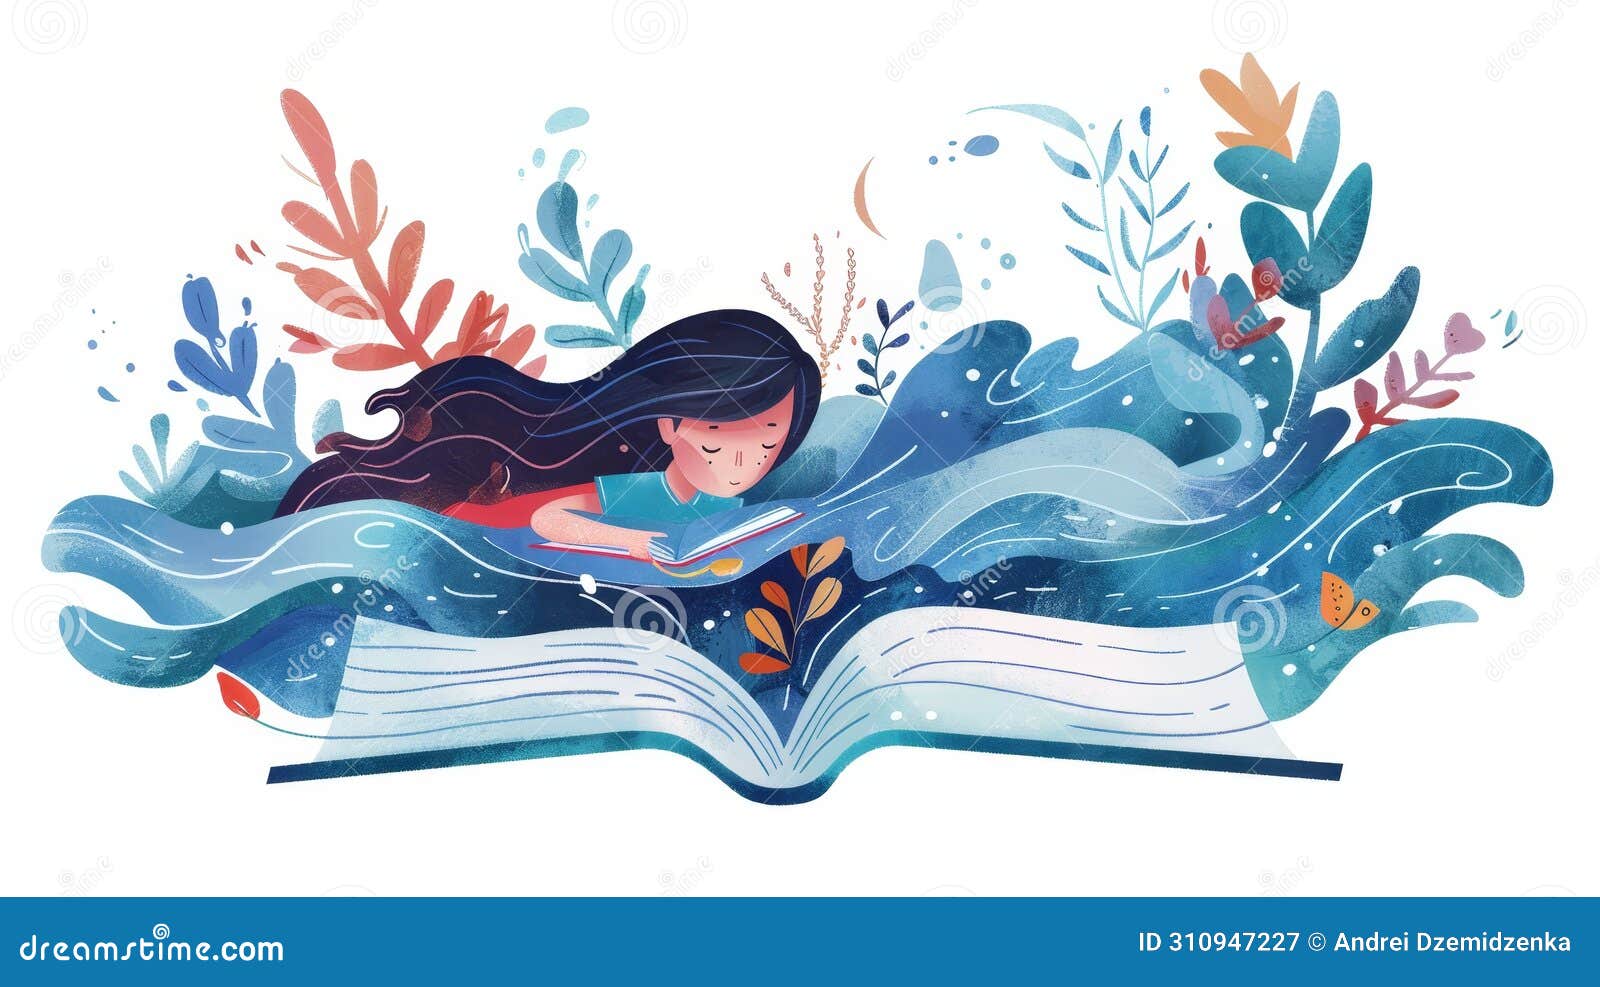 bookworm, reader swimming in fantasy water on pages, imagination concept. tiny character, bibliophile. flat graphic